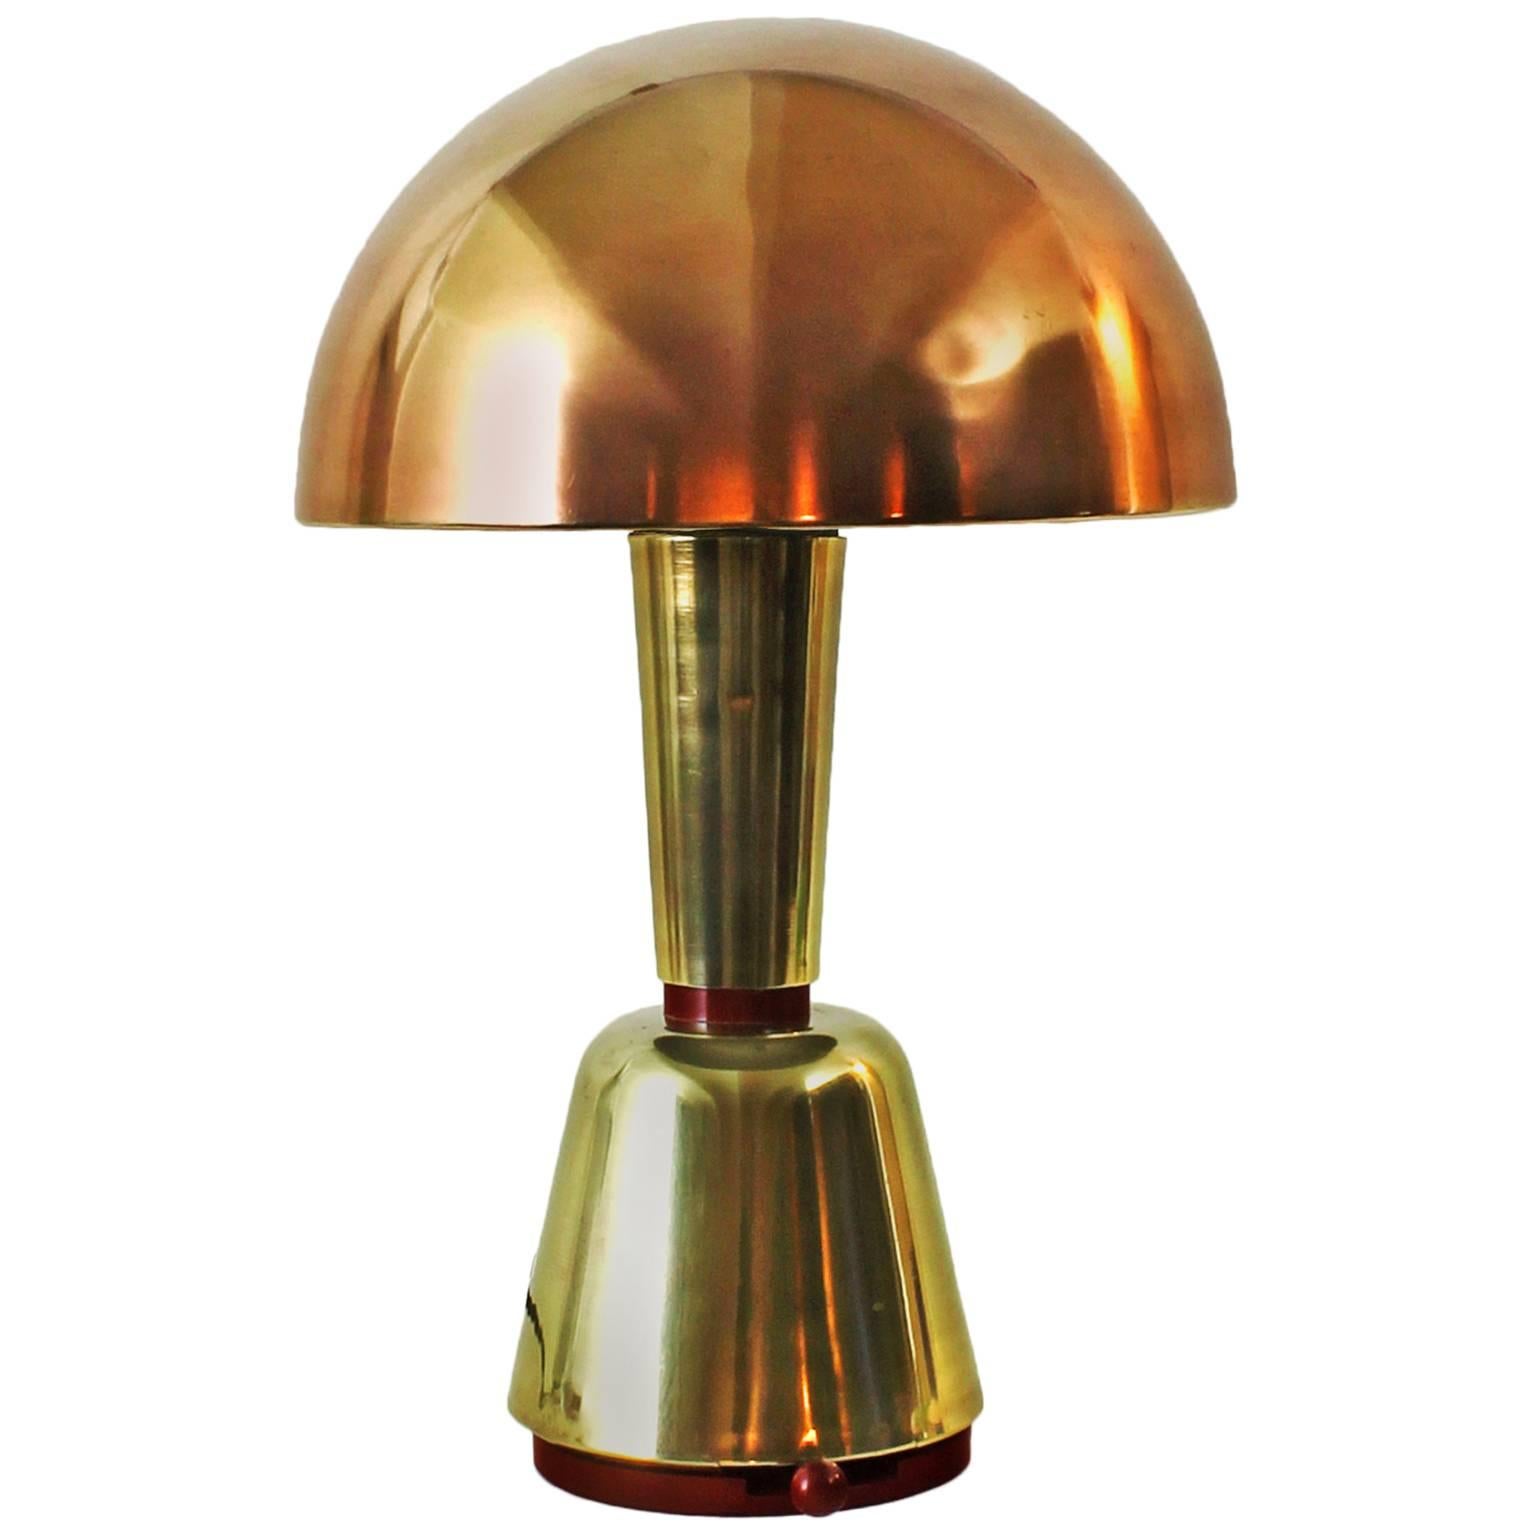 1920s Art Deco Desk Lamp by Magilux, brass, copper and bakelite - Italy